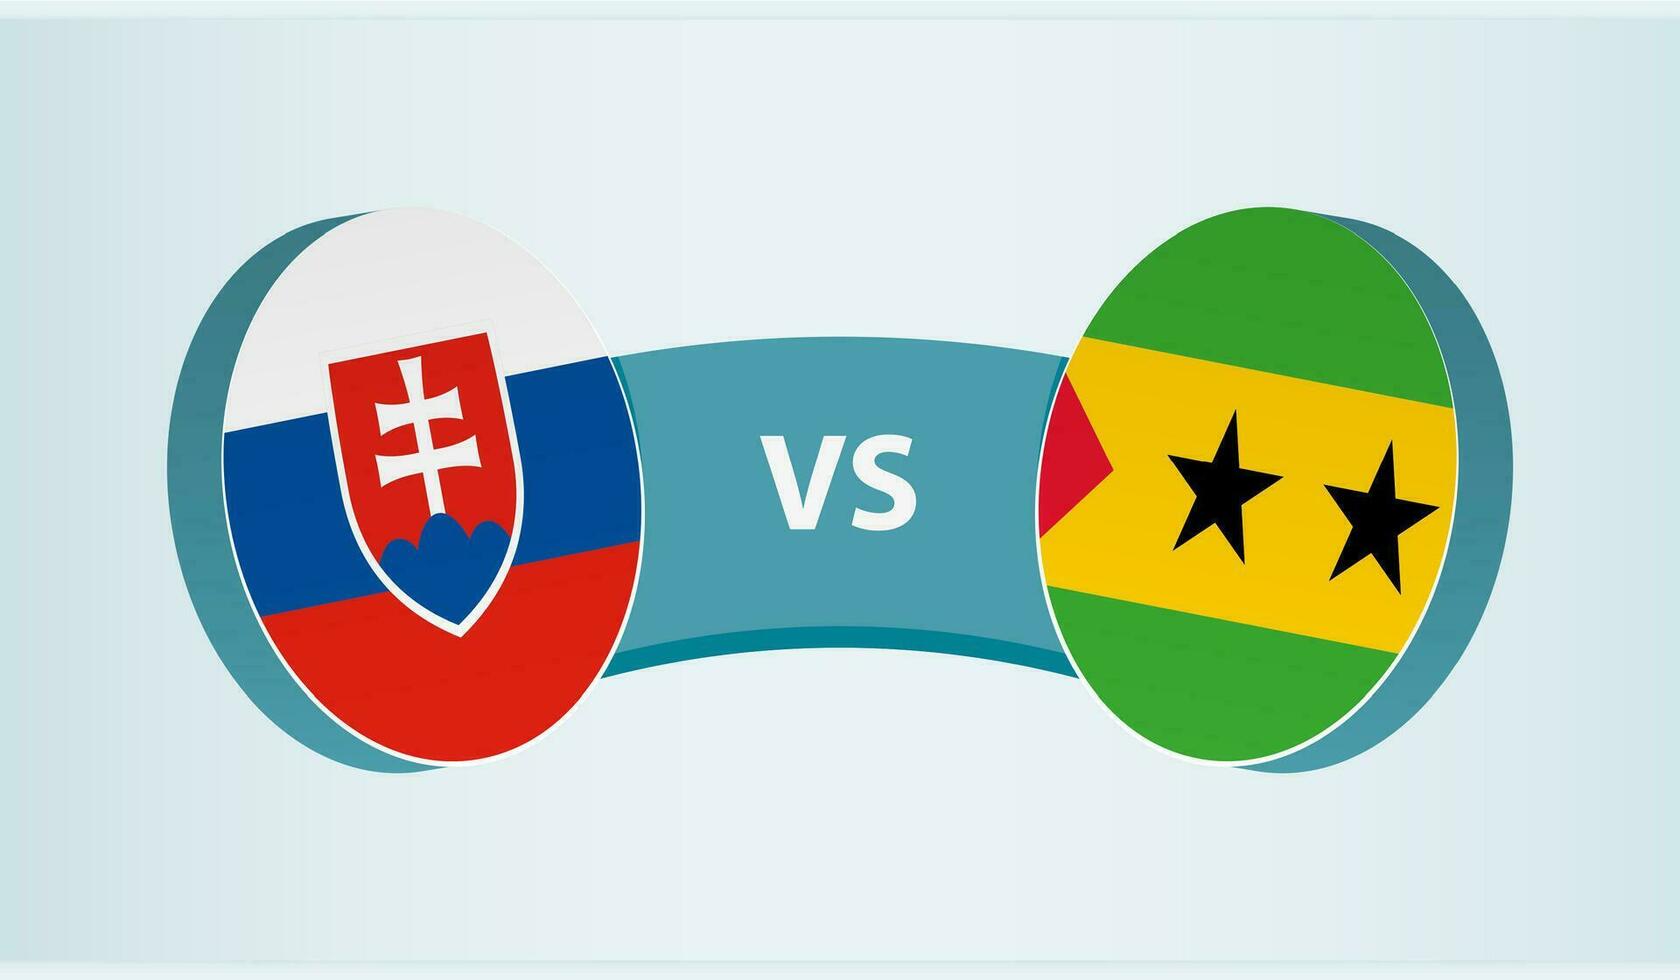 Slovakia versus Sao Tome and Principe, team sports competition concept. vector